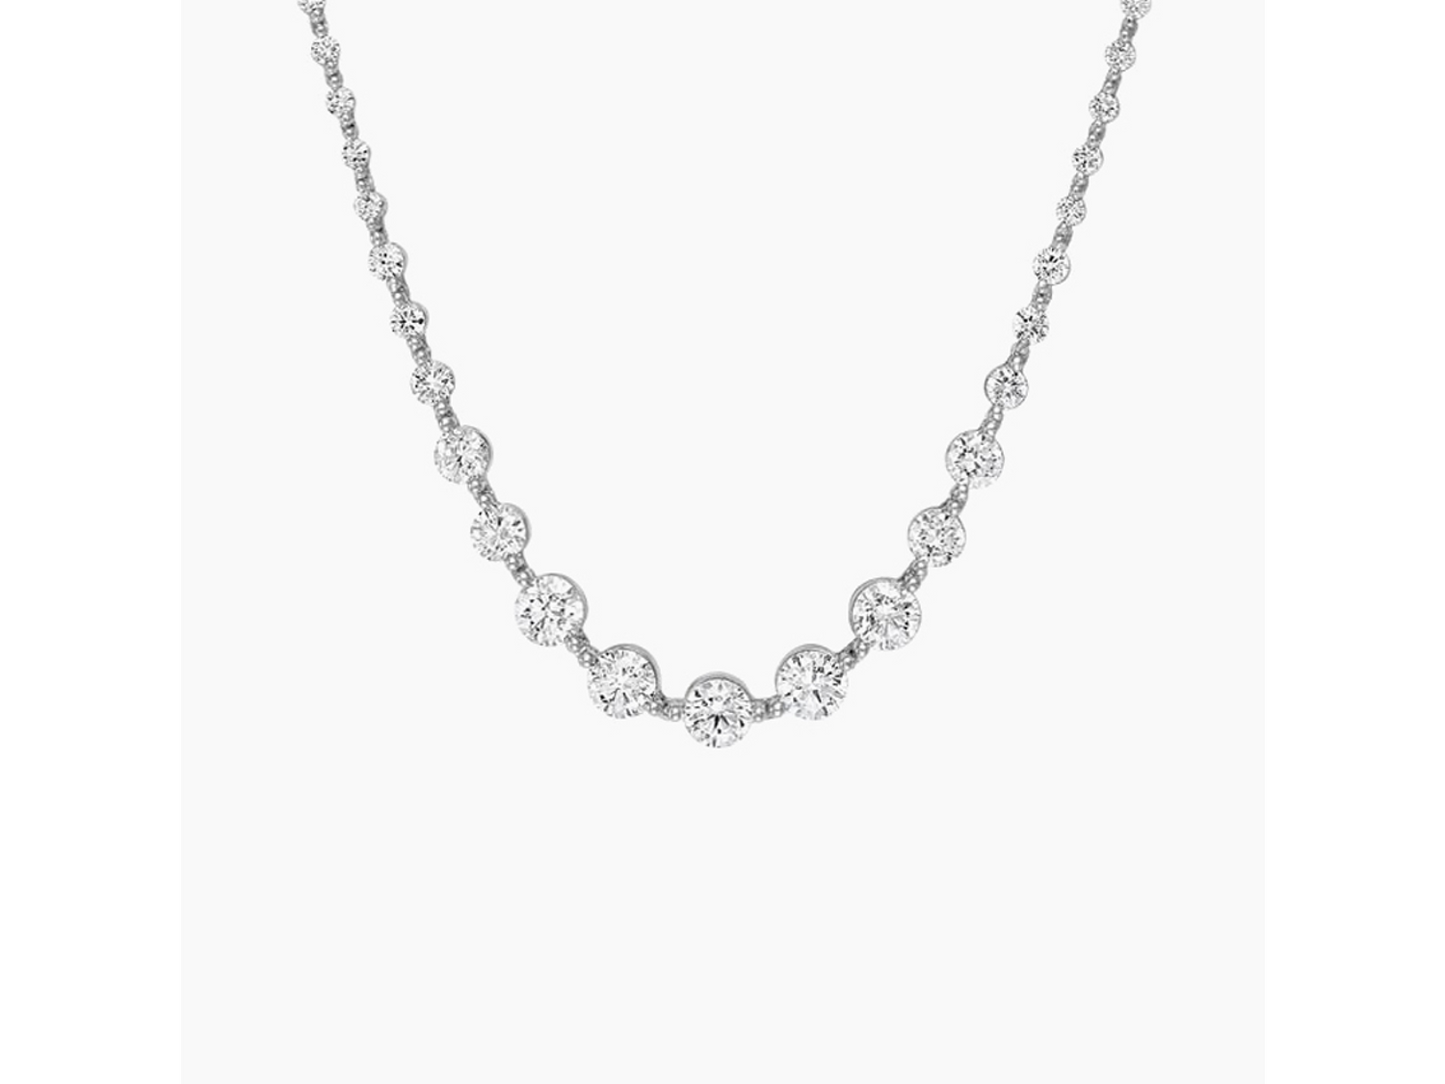 Riviere Style 18K White Gold Lab Diamond Necklace 6 1/8 ctw